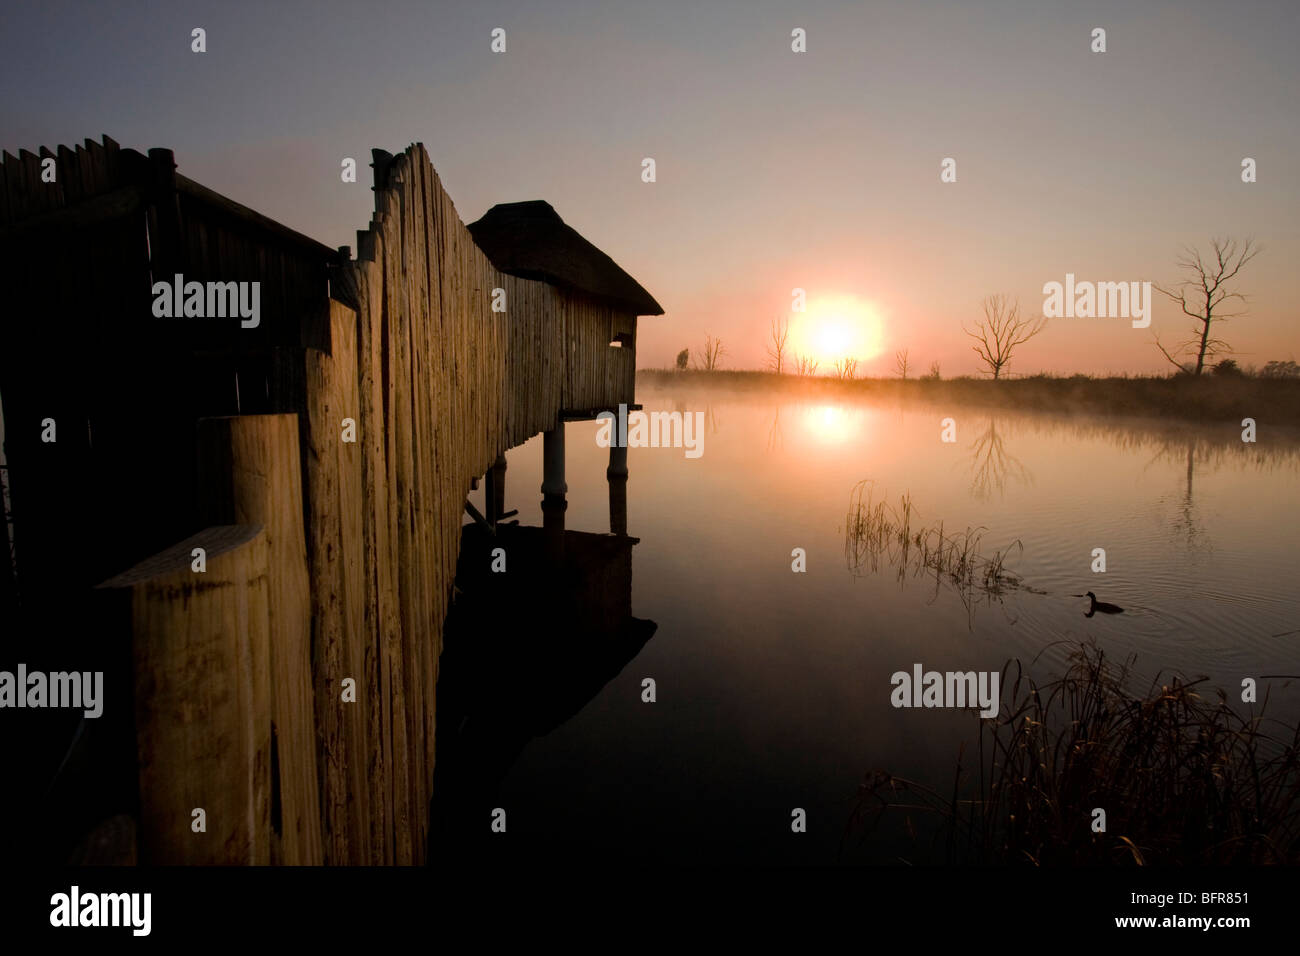 Sunrise over a dam showing wooden walkway leading to bird hide Stock Photo